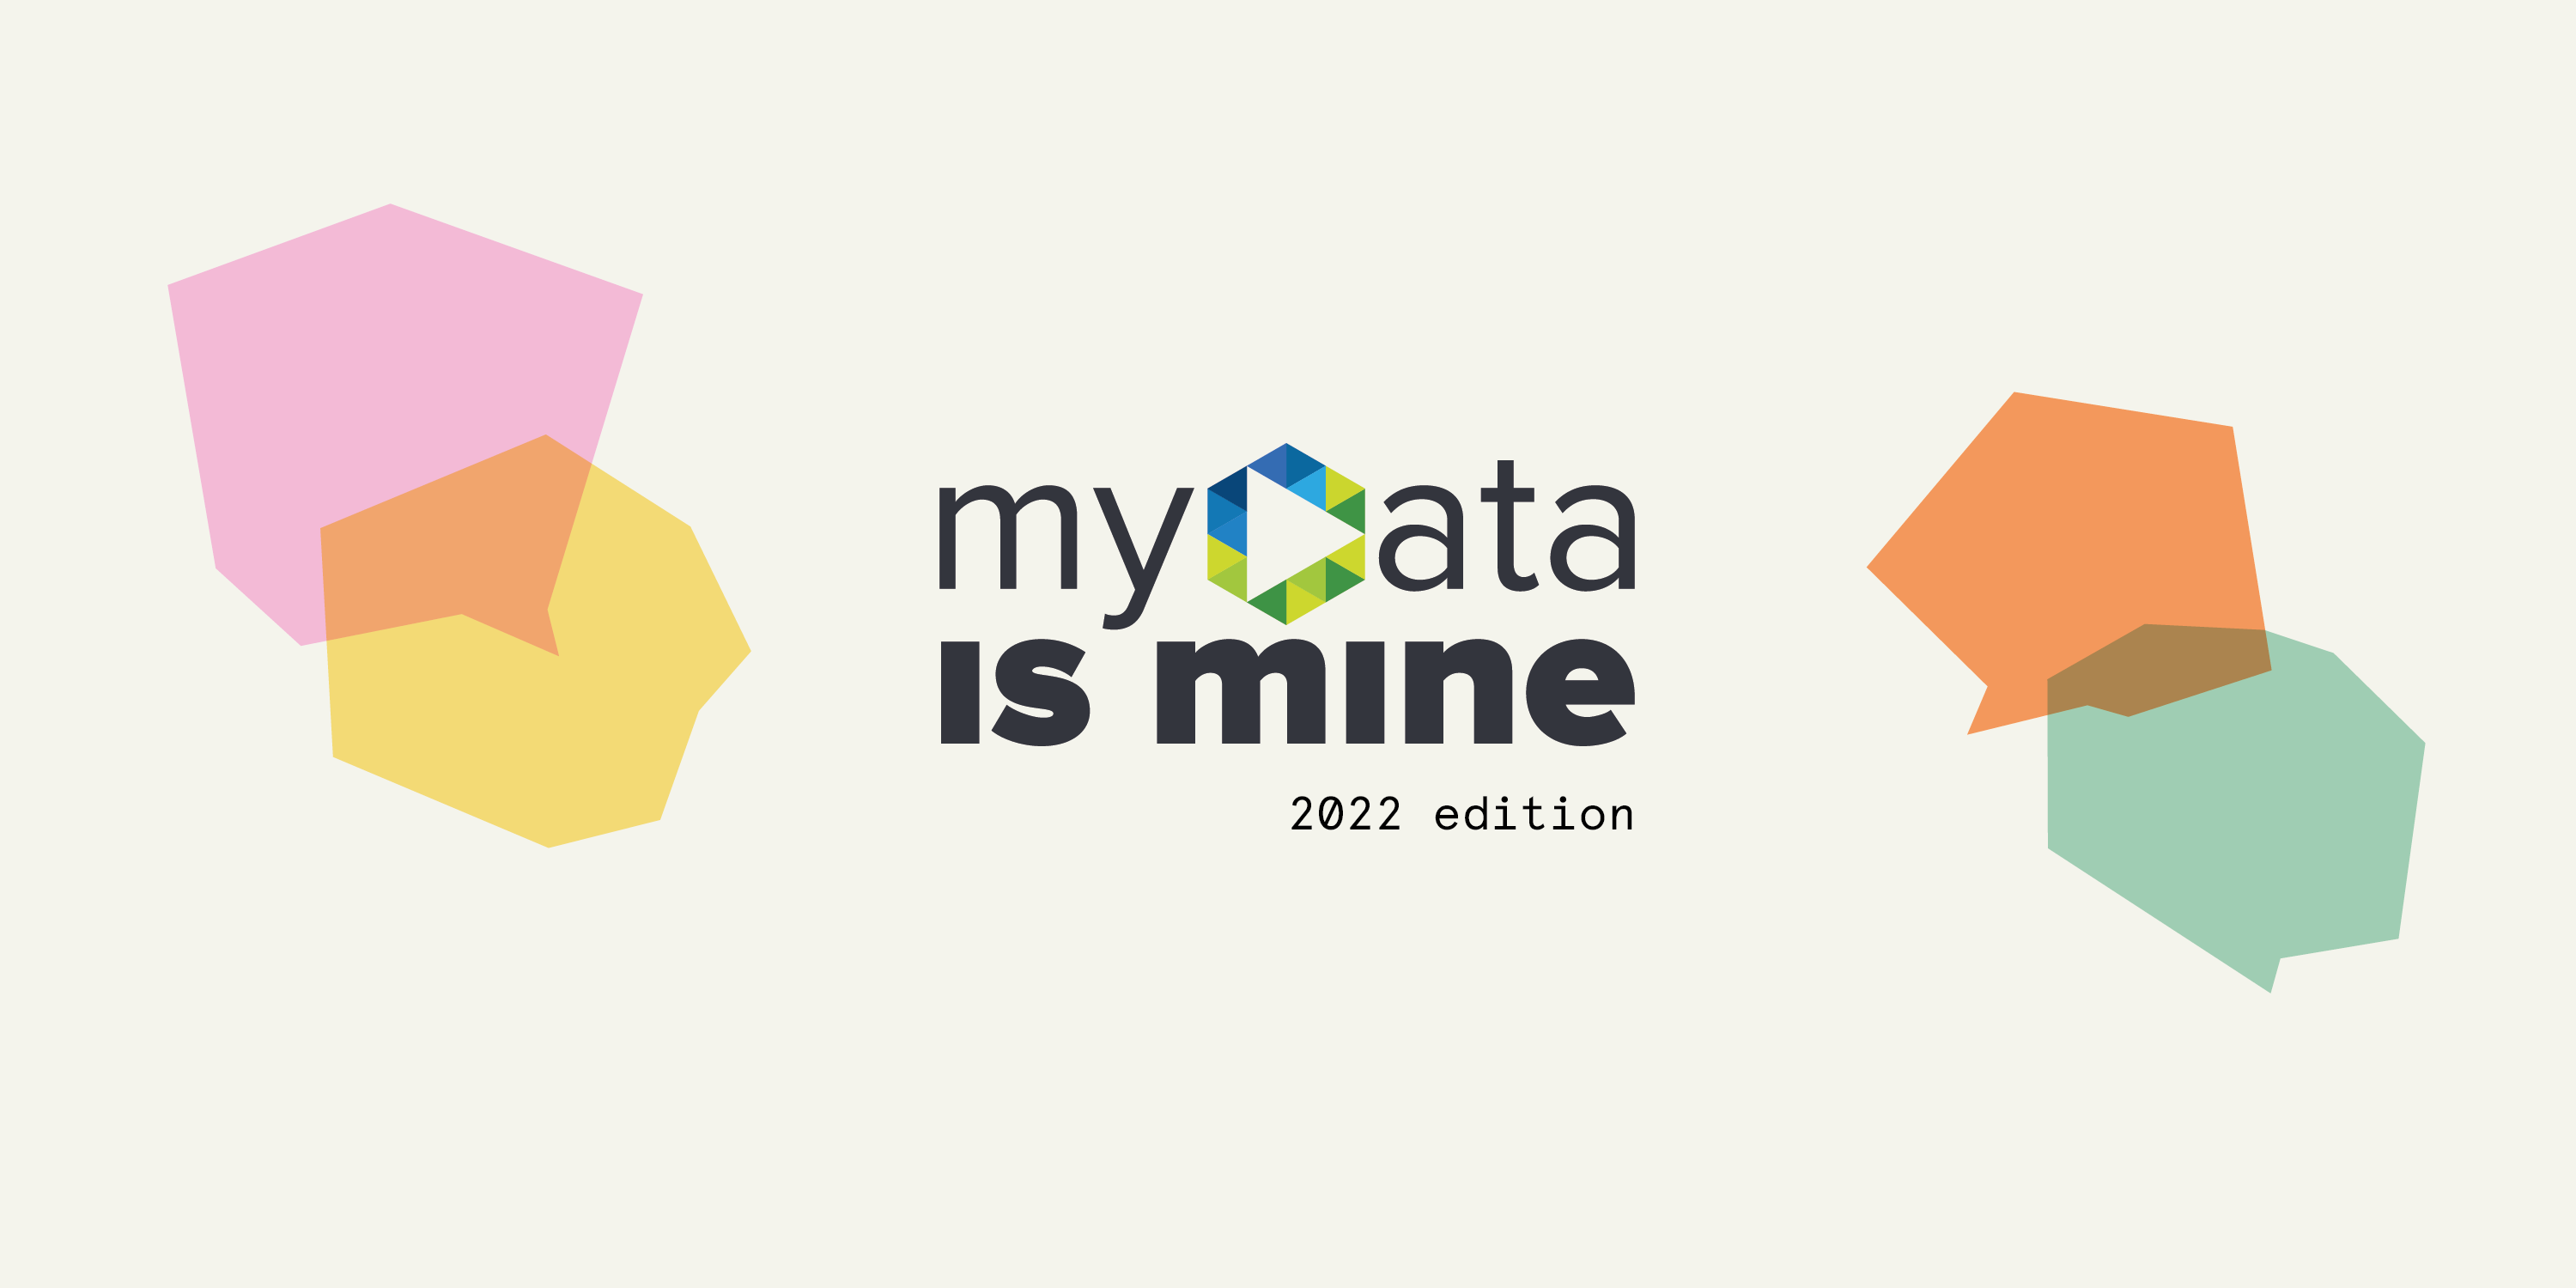 my data is mine 2022 edition